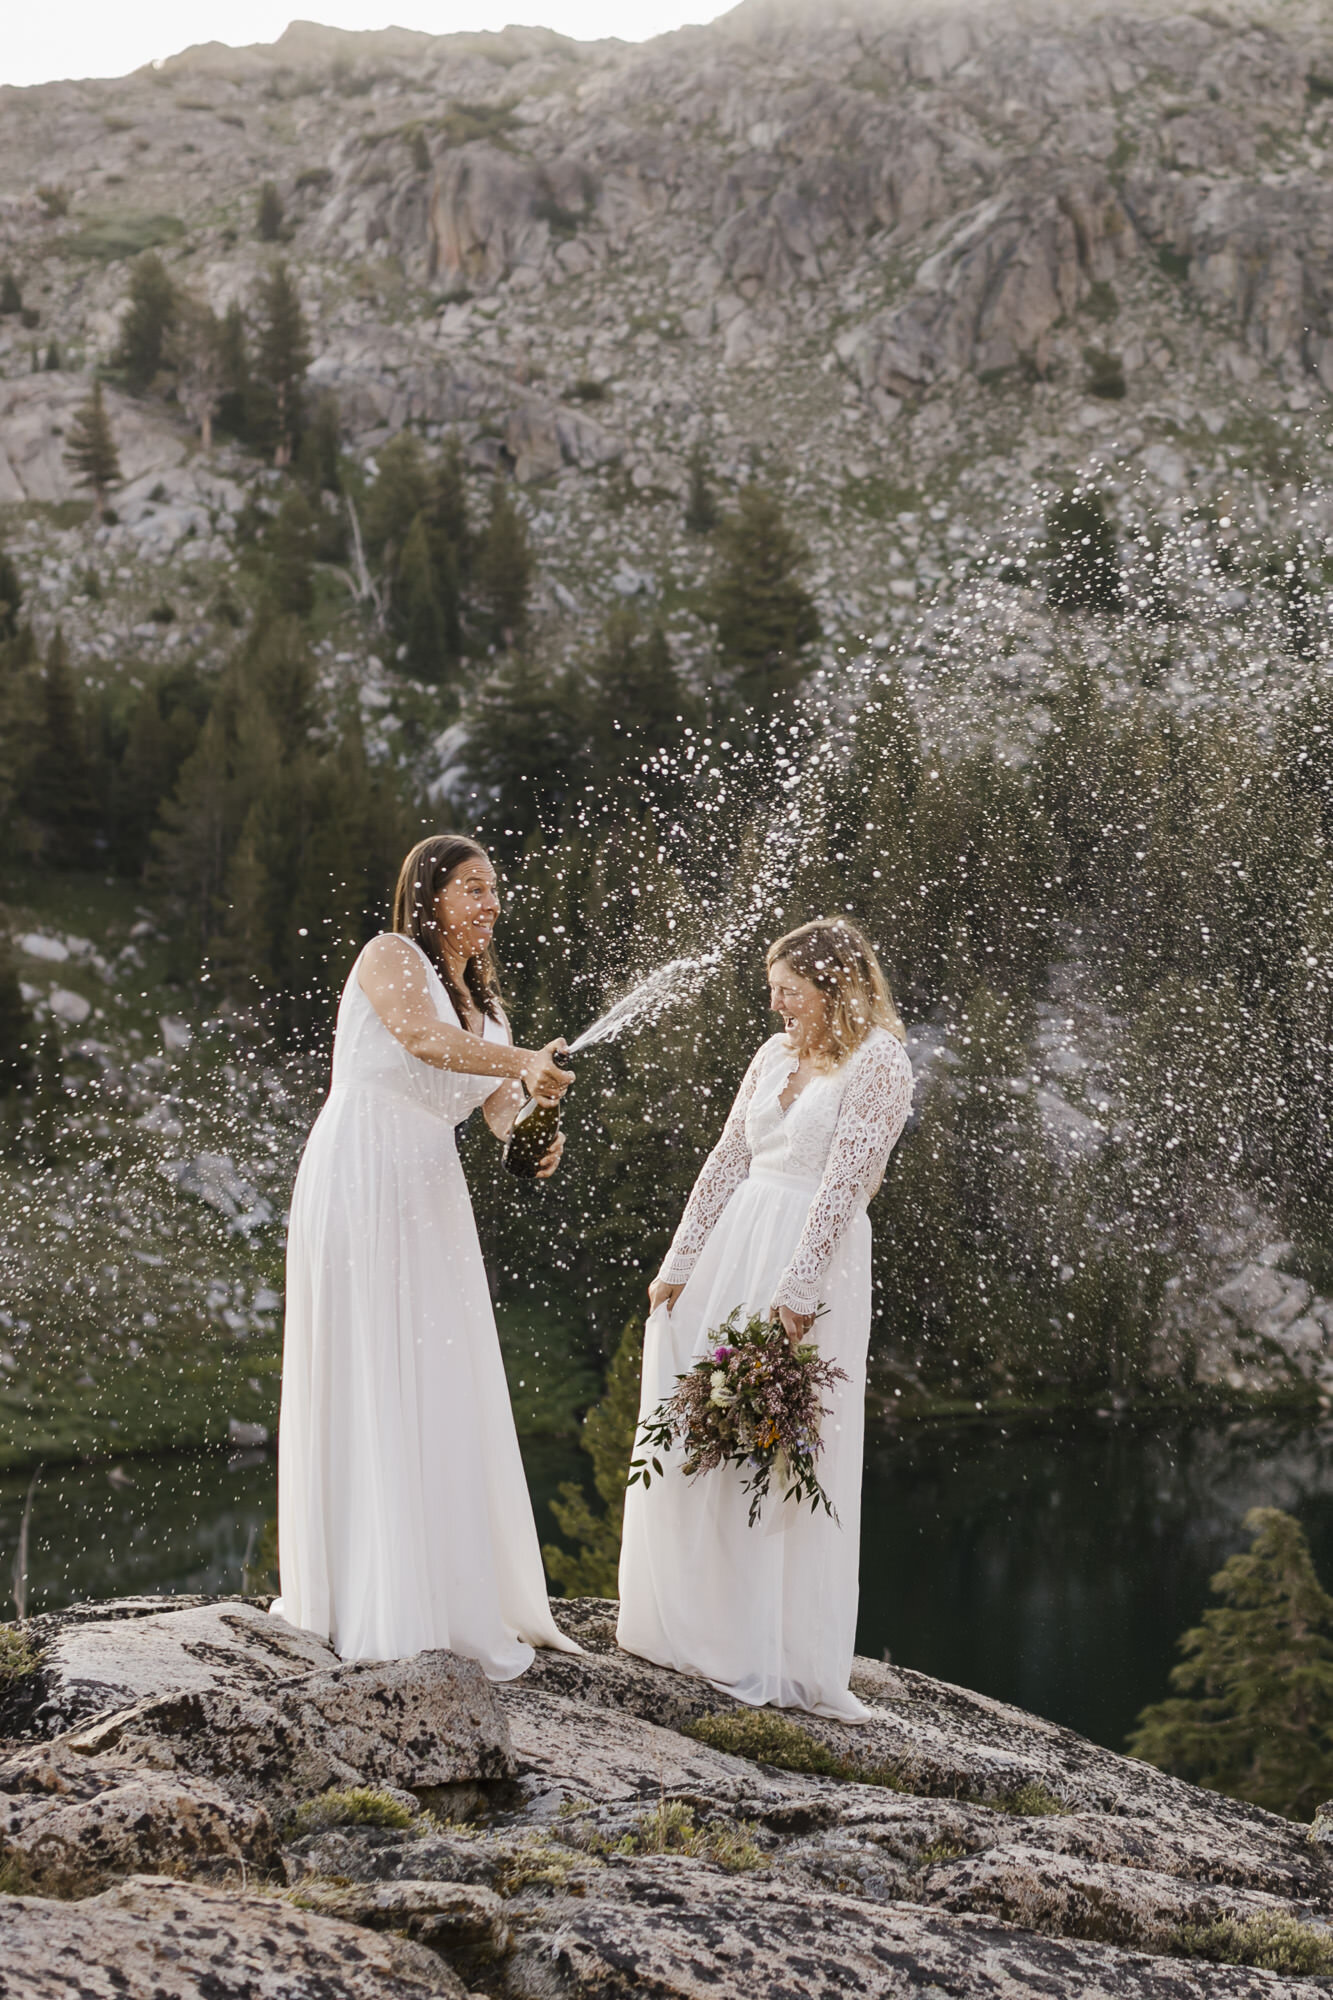 Lesbian couple celebrates getting married by popping champagne during their backpacking elopement in the Sierra Nevada mountains in California